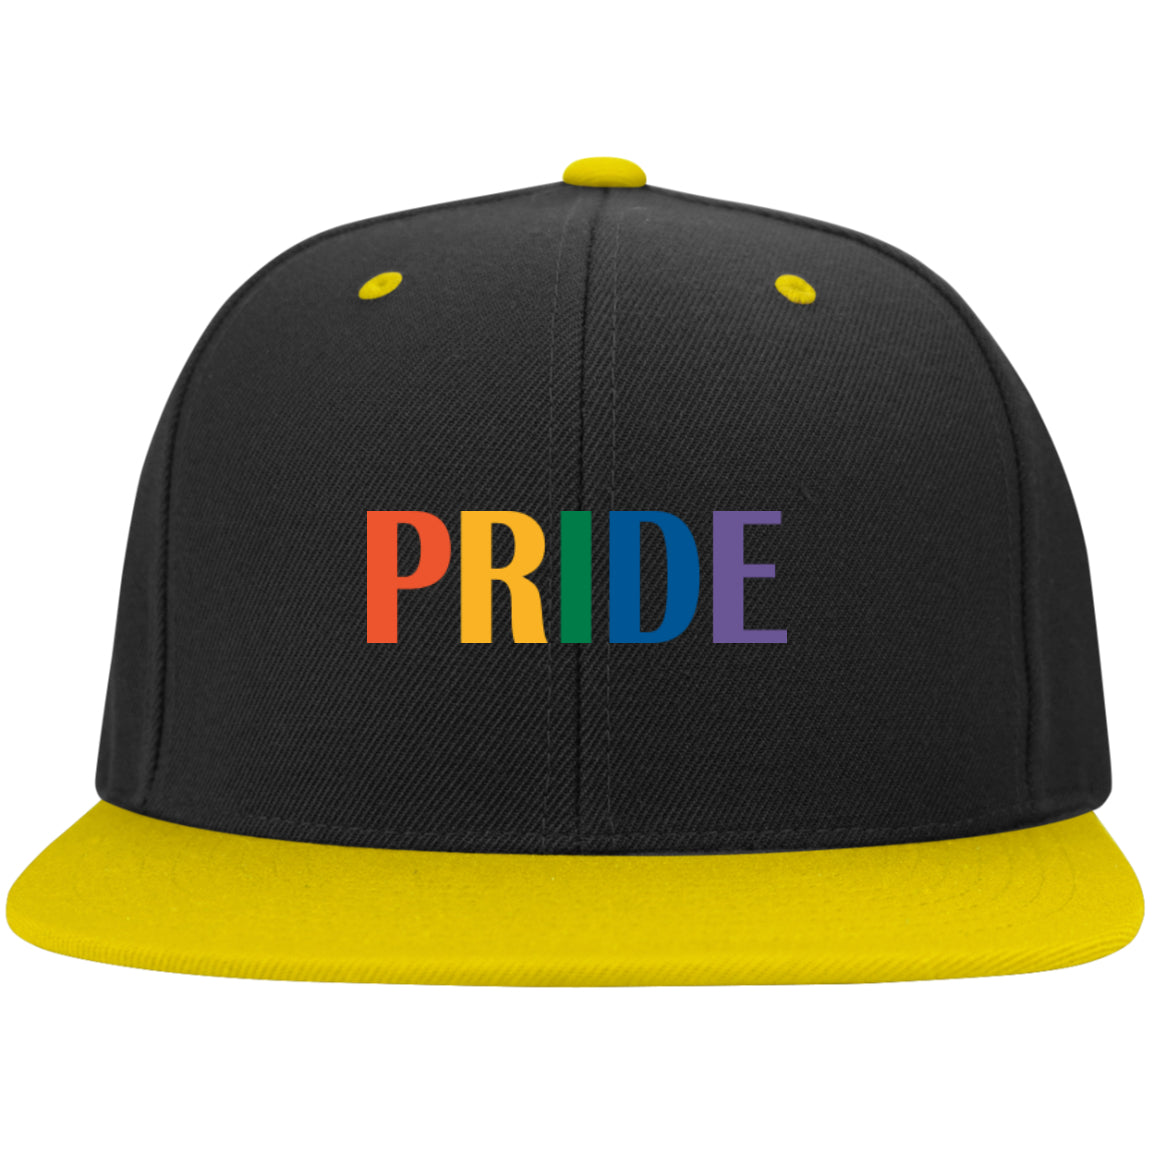 Hats - Embroidered Gay PRIDE Hat